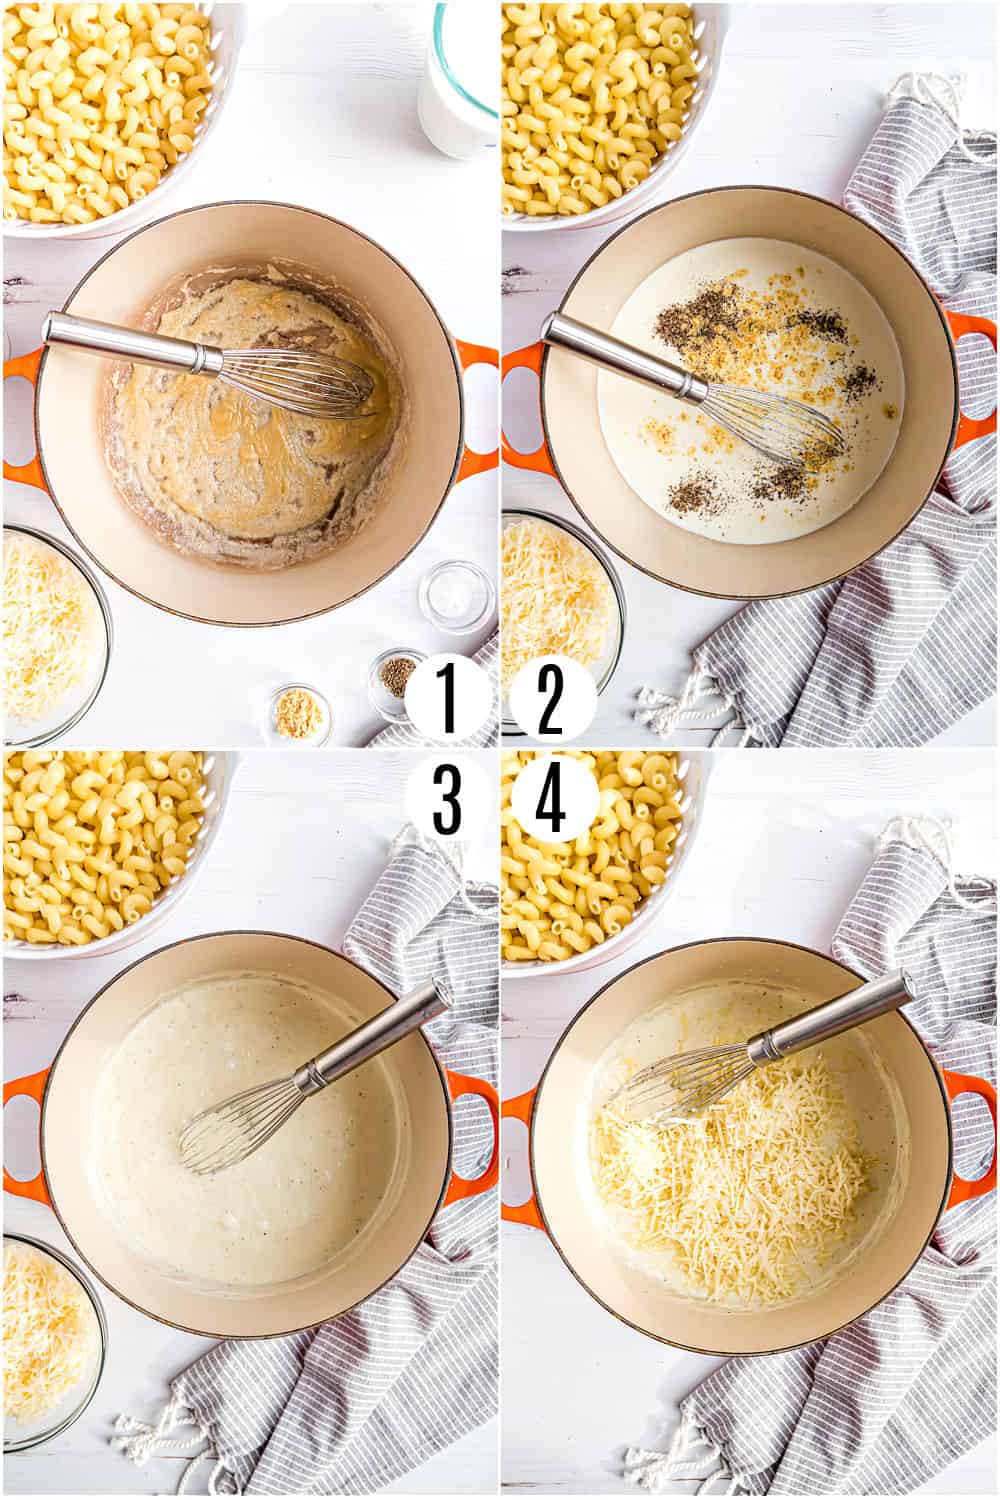 Step by step photos showing how to make panera mac and cheese.